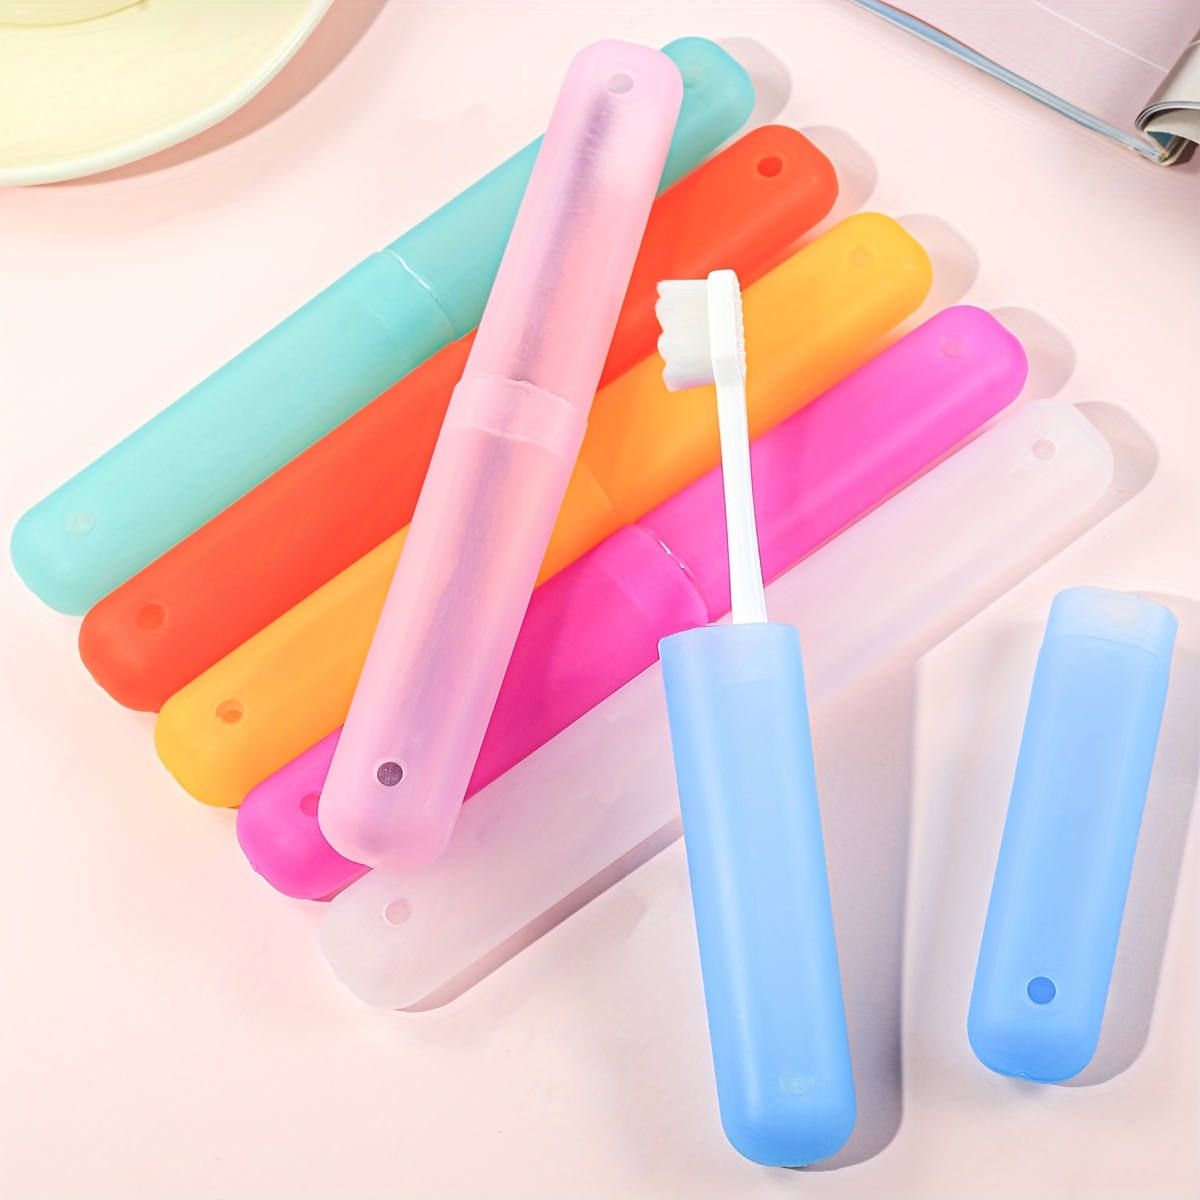 

Portable Dust-proof Toothbrush Cases Holder Plastic Toothbrush Container Storage Box For Daily And Travel Use, Random Colors